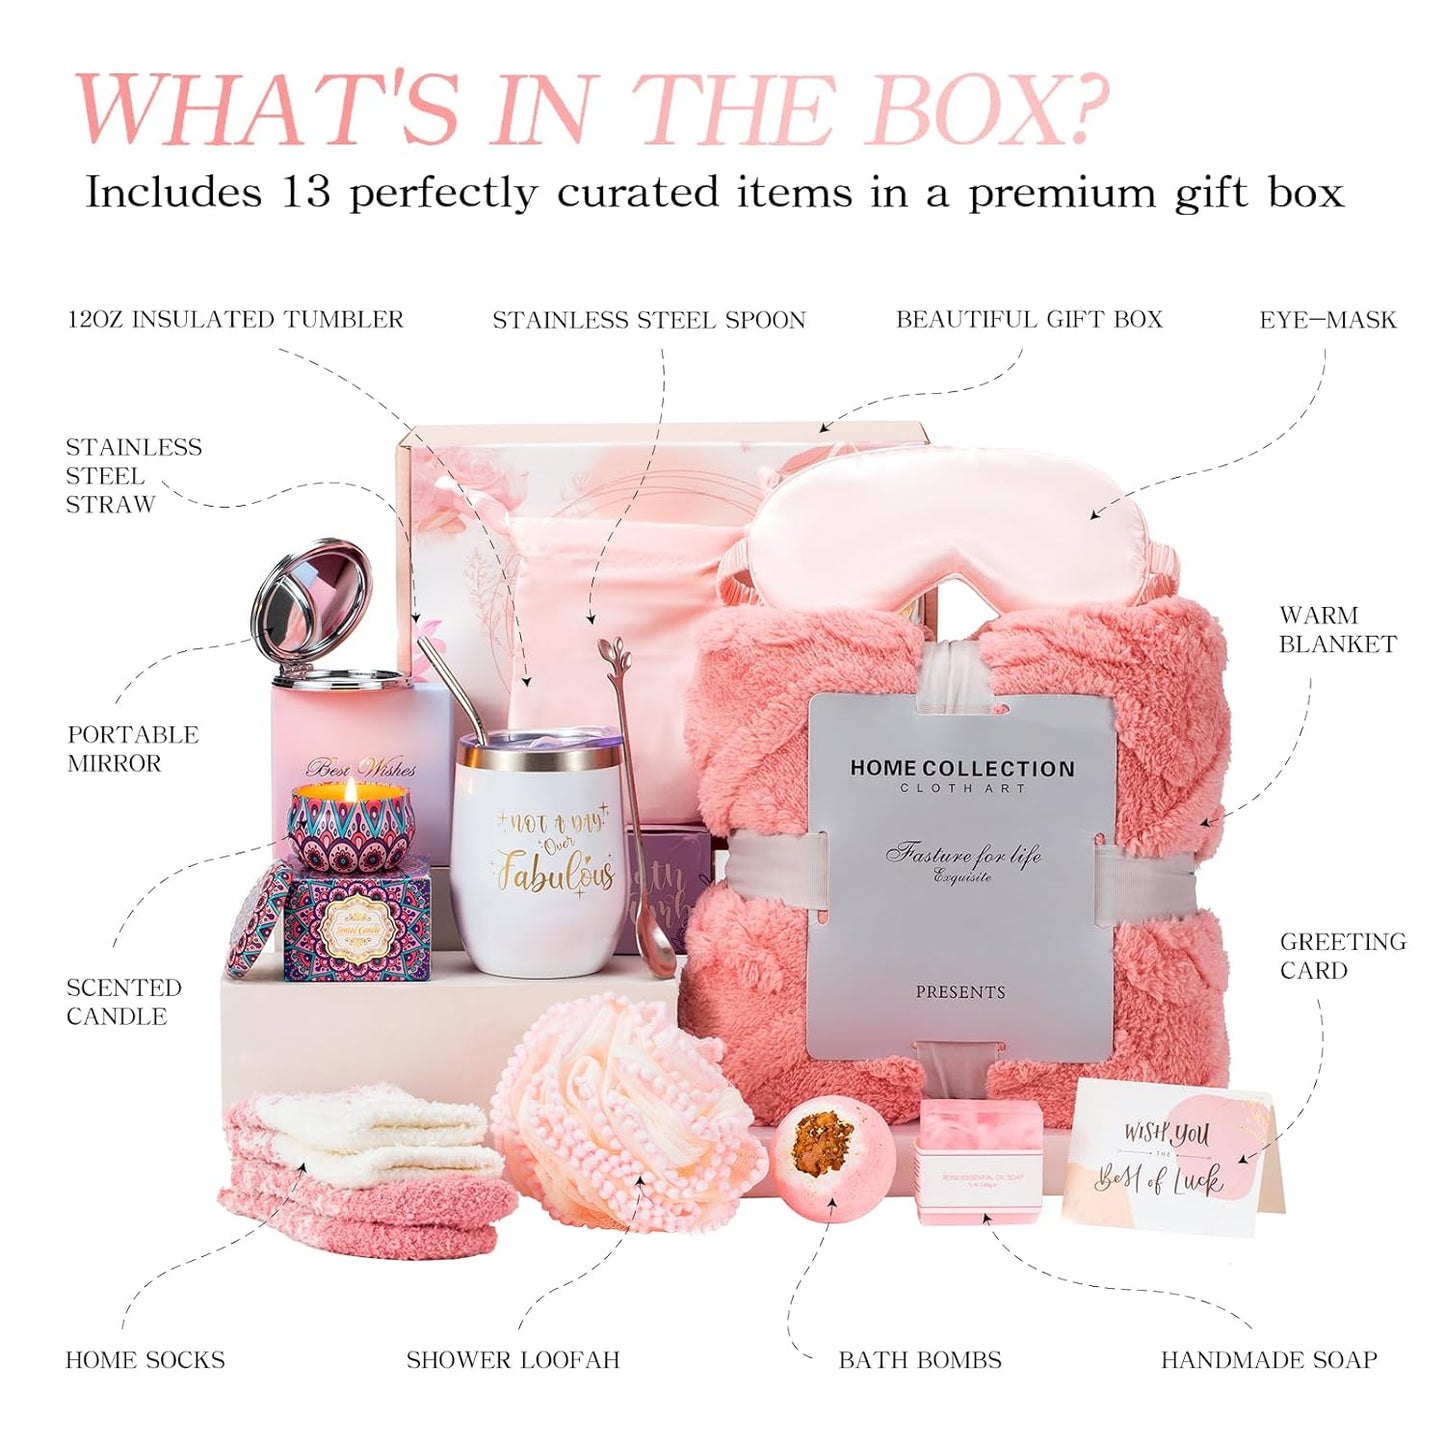 Unique Valentine's Day/Occasion Gift Sets for Women - Get Well Soon Spa Gift Basket for Friend, Mother, Wife, Sister. Relaxation Gifts for Her.